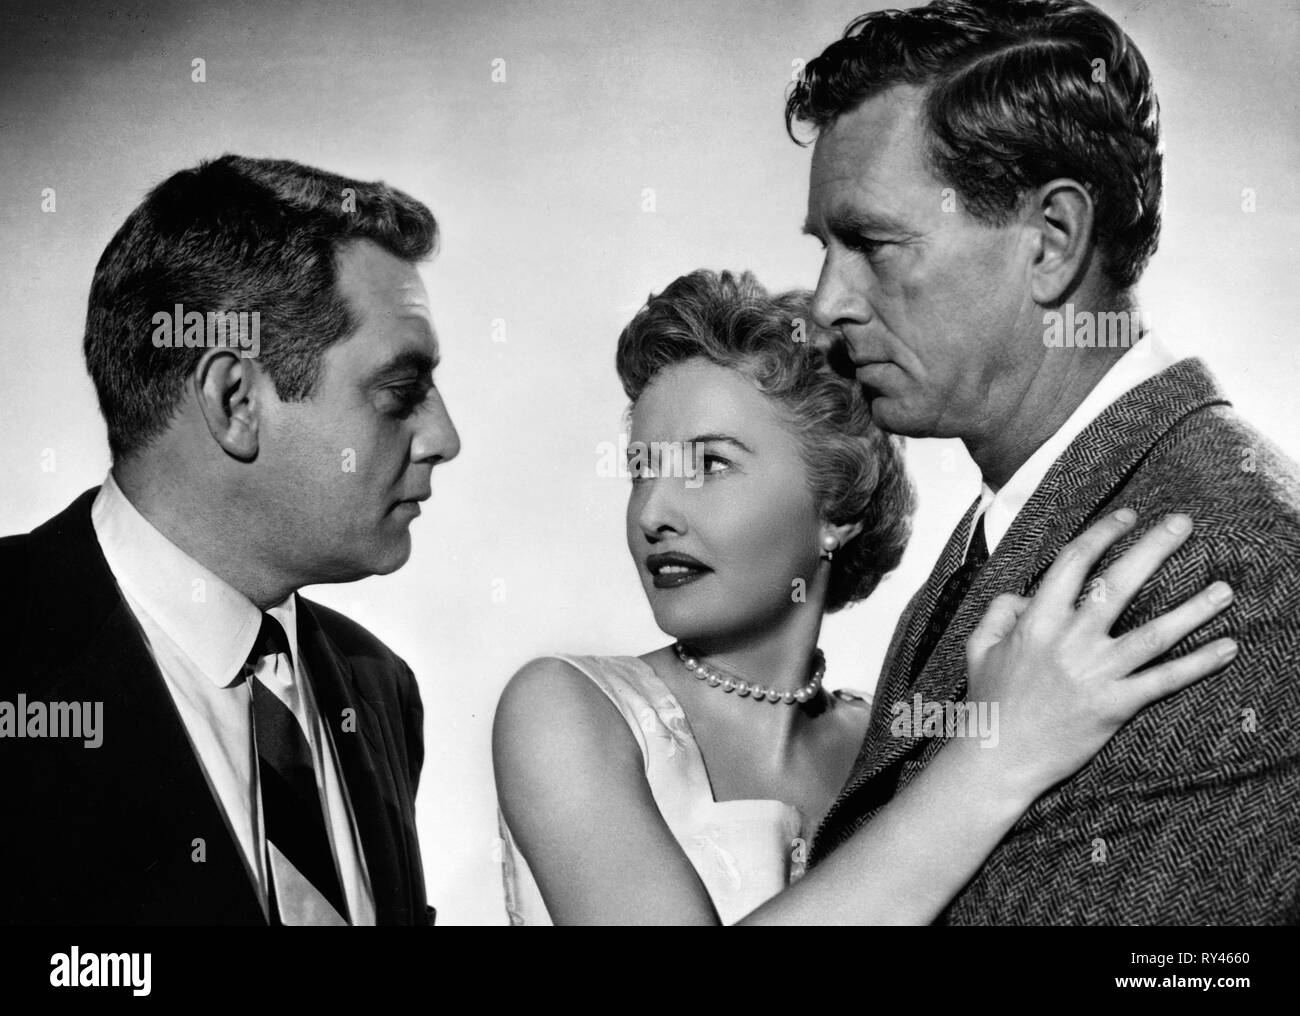 RAYMOND BURR, Barbara Stanwyck, Sterling Hayden, crime passionnel, 1957 Banque D'Images